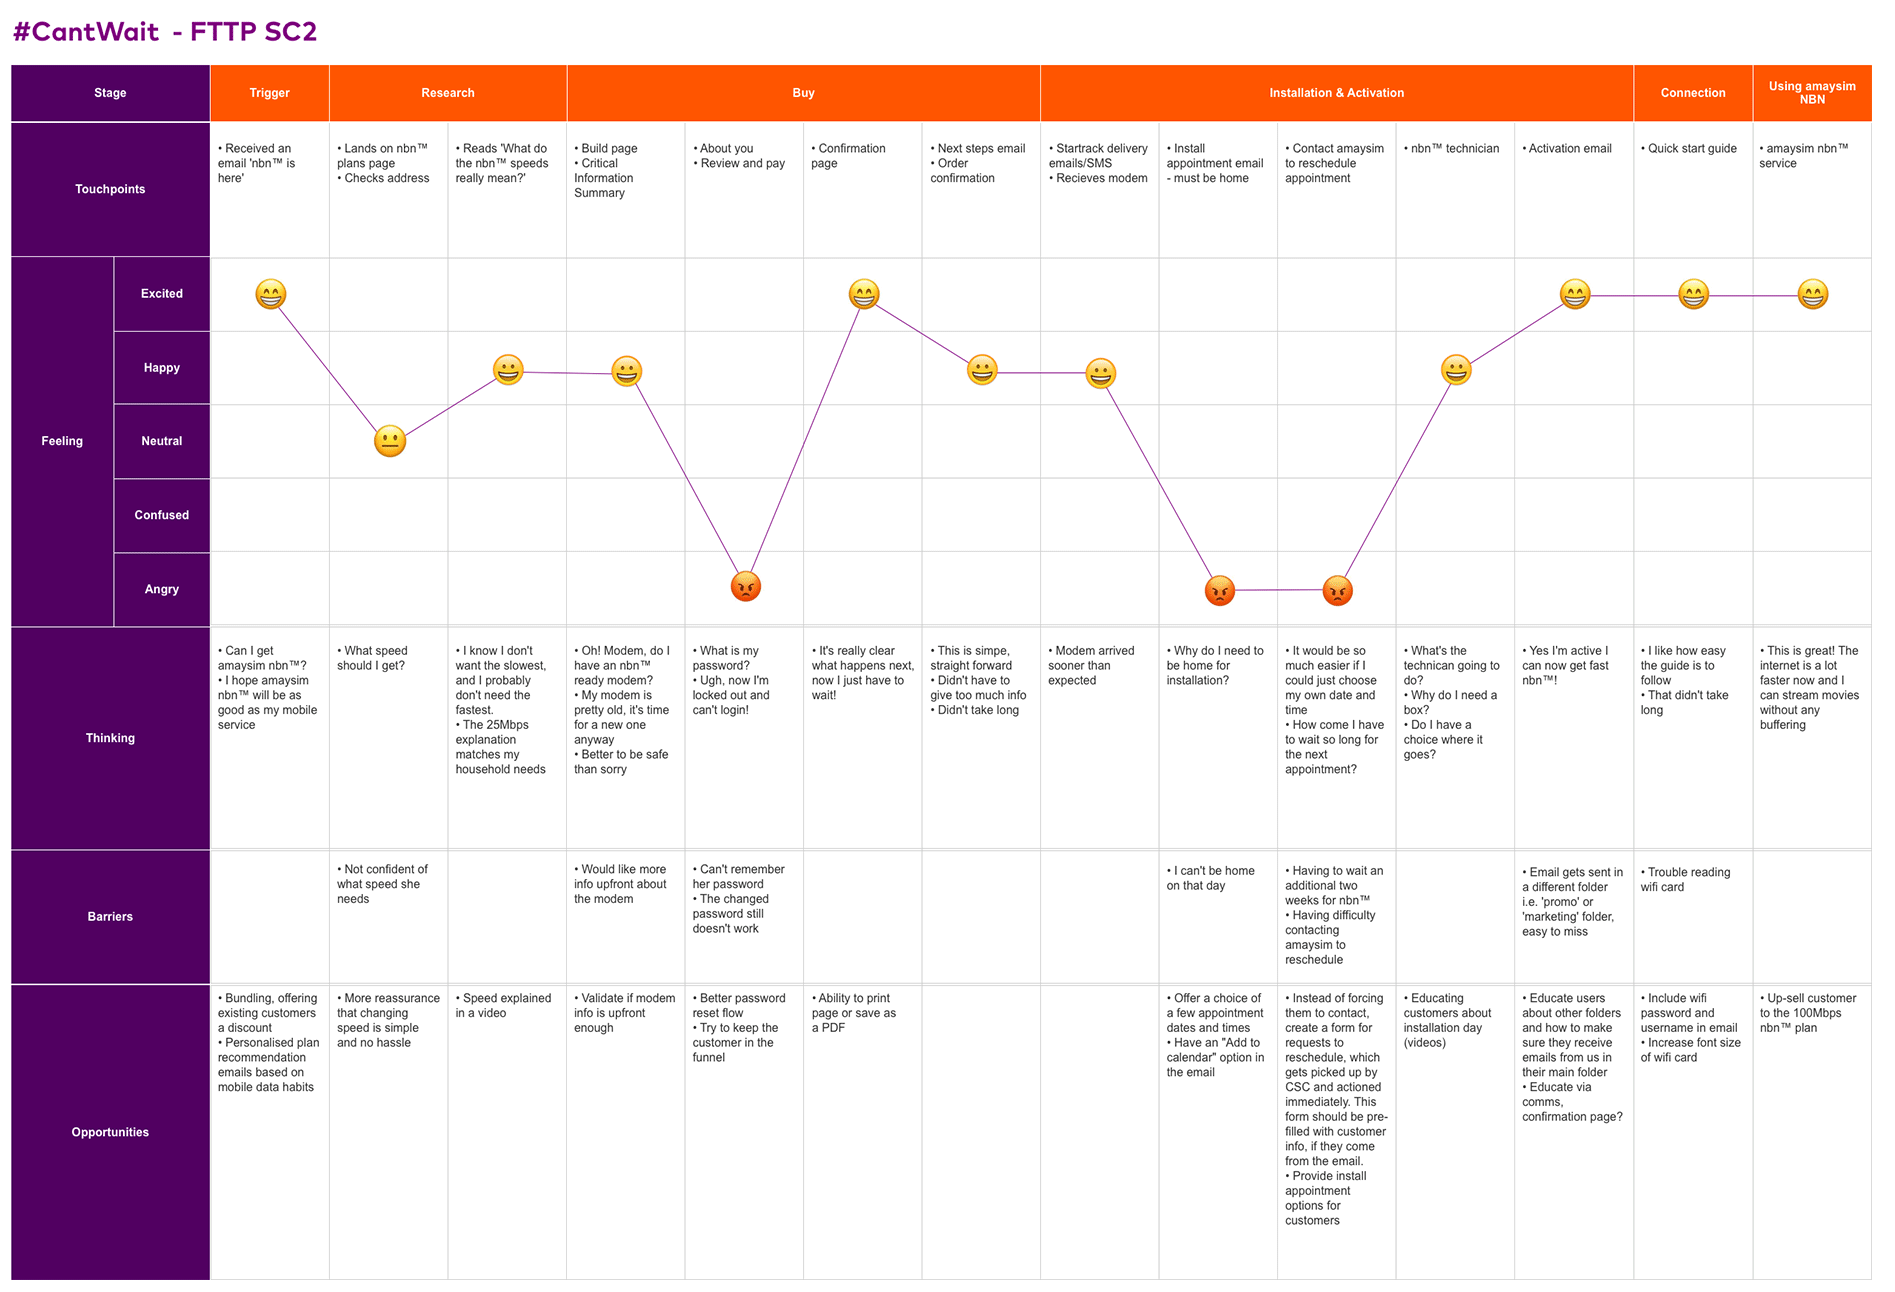 Image of the final journey map. It is a table outlining each of the steps this person took to get set up with amaysim's NBN